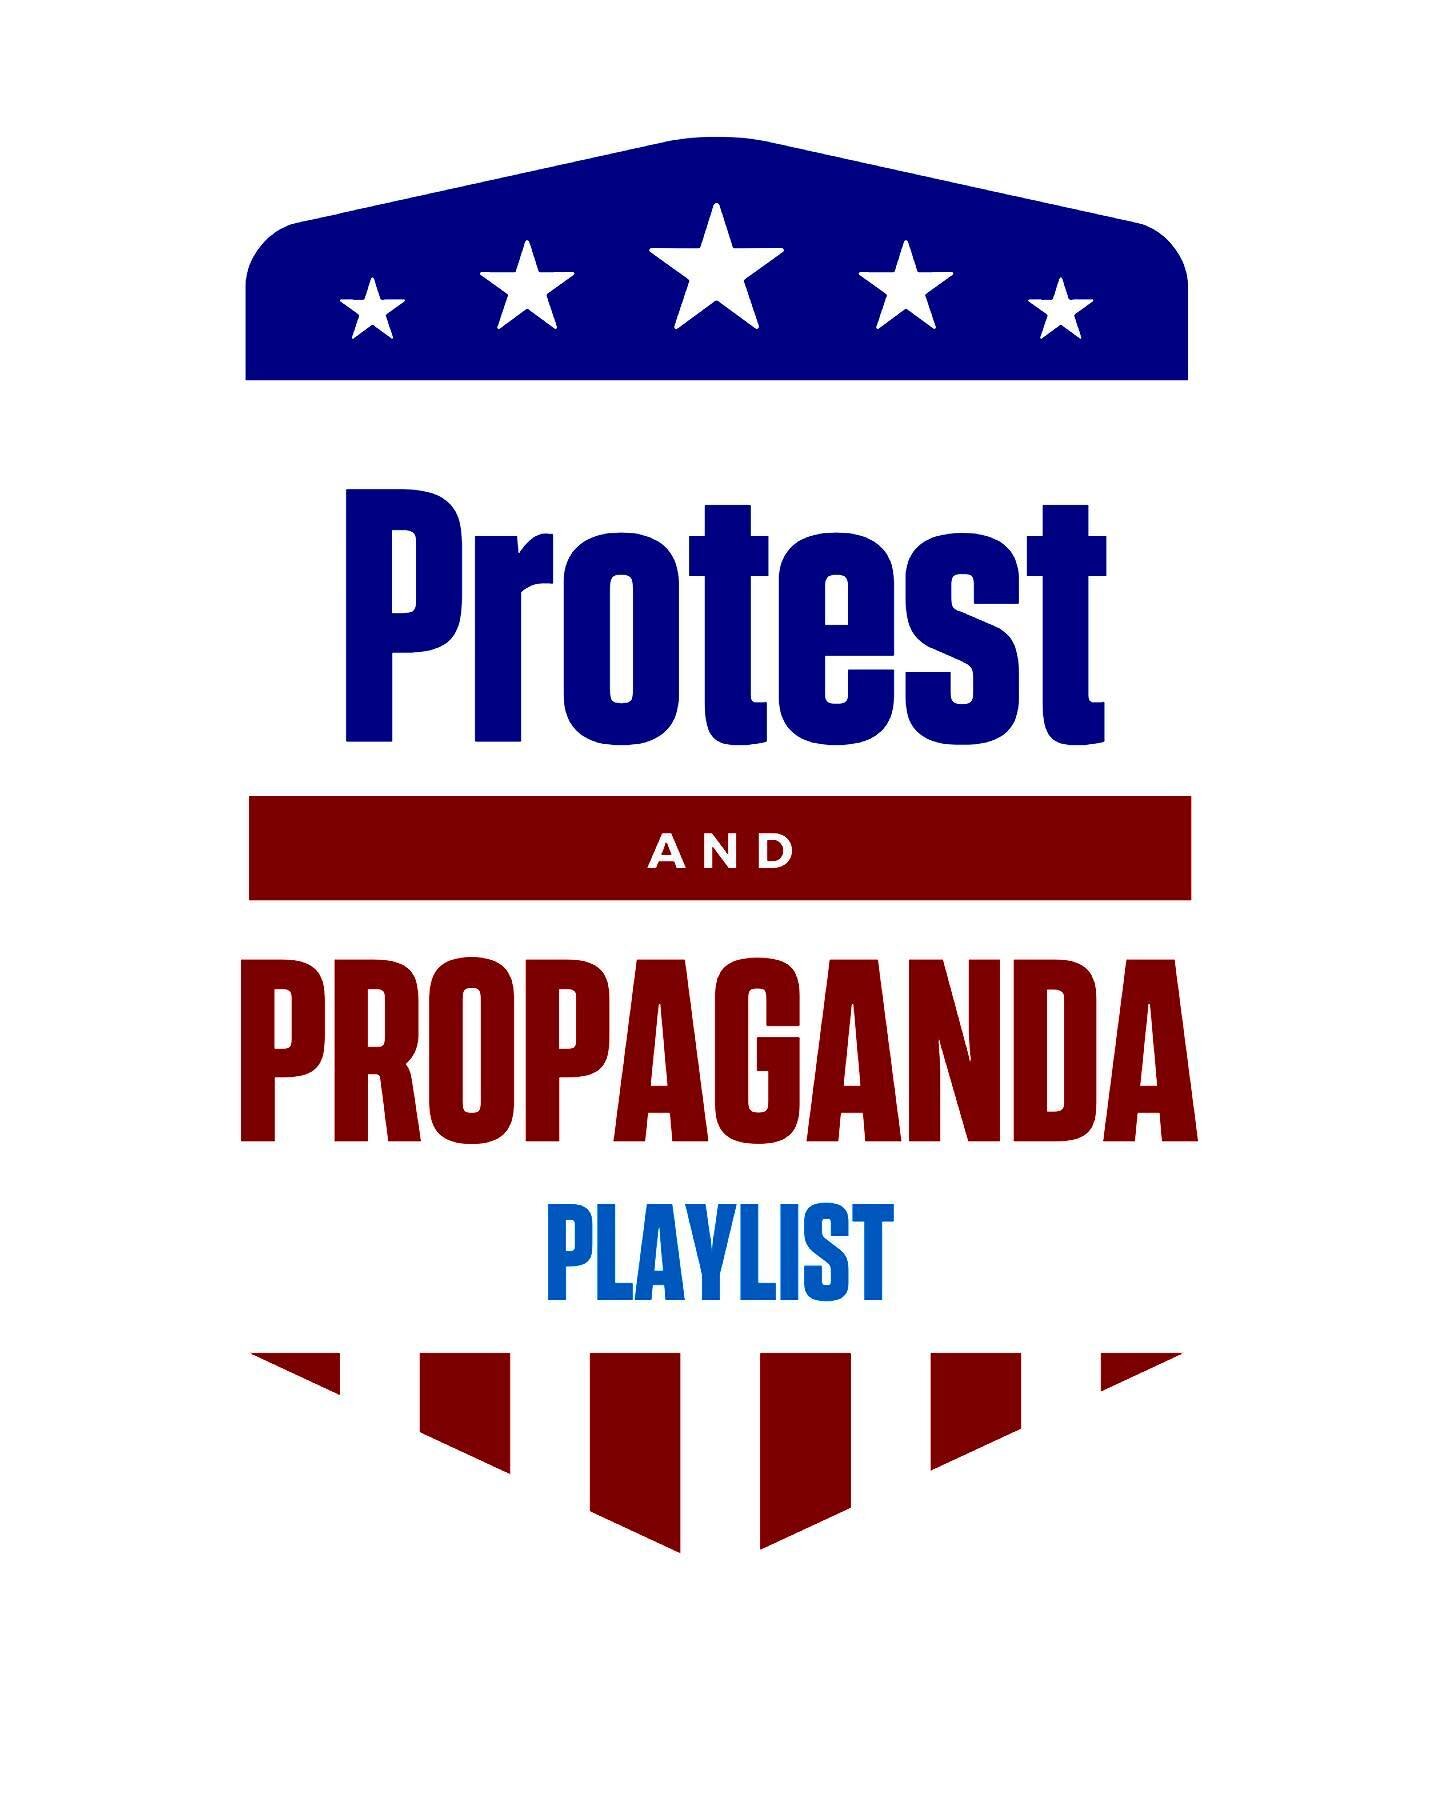 New Playlist coming next Monday...Protest and Propaganda music, with introductions to each piece by Daniel Smith.
&bull;
&bull;
&bull;
Music doesn&rsquo;t have an ideological belief system or cause. People do. And music is a powerful way to promote i